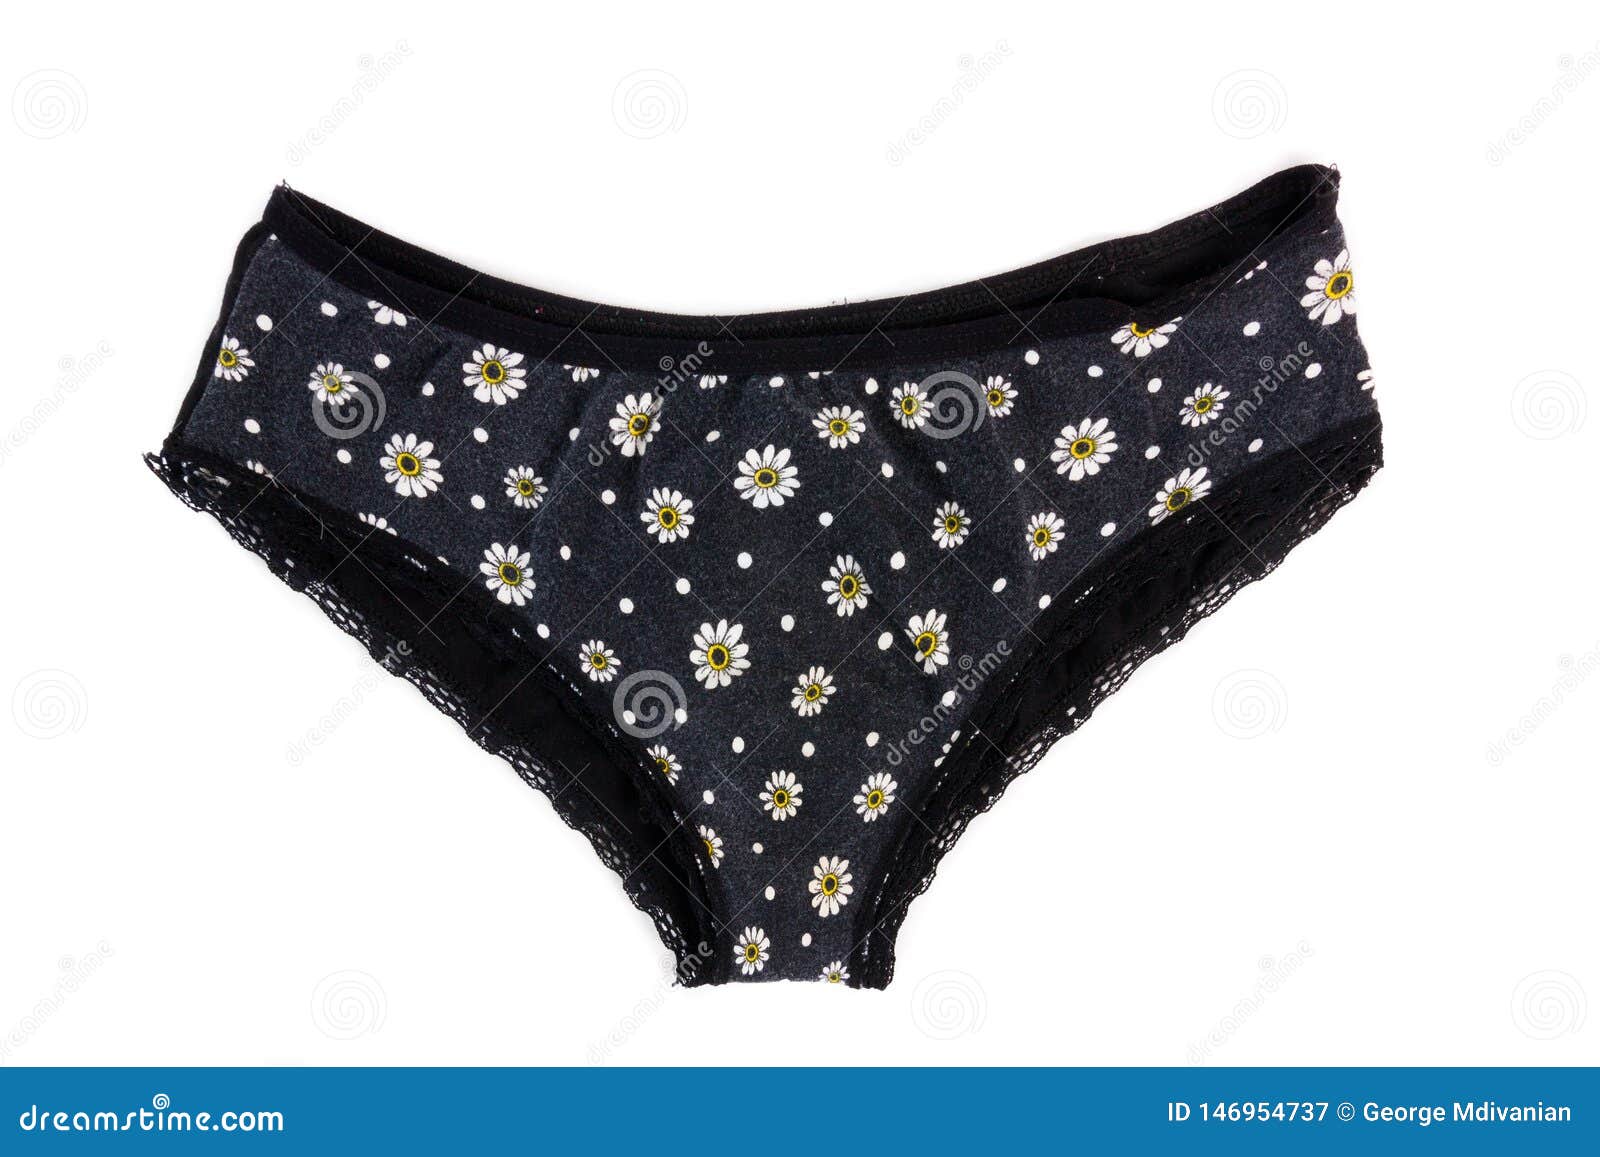 Women's Black Lace Panties Isolated On White Background. Sexy Underwear.  Stock Photo, Picture and Royalty Free Image. Image 94022252.